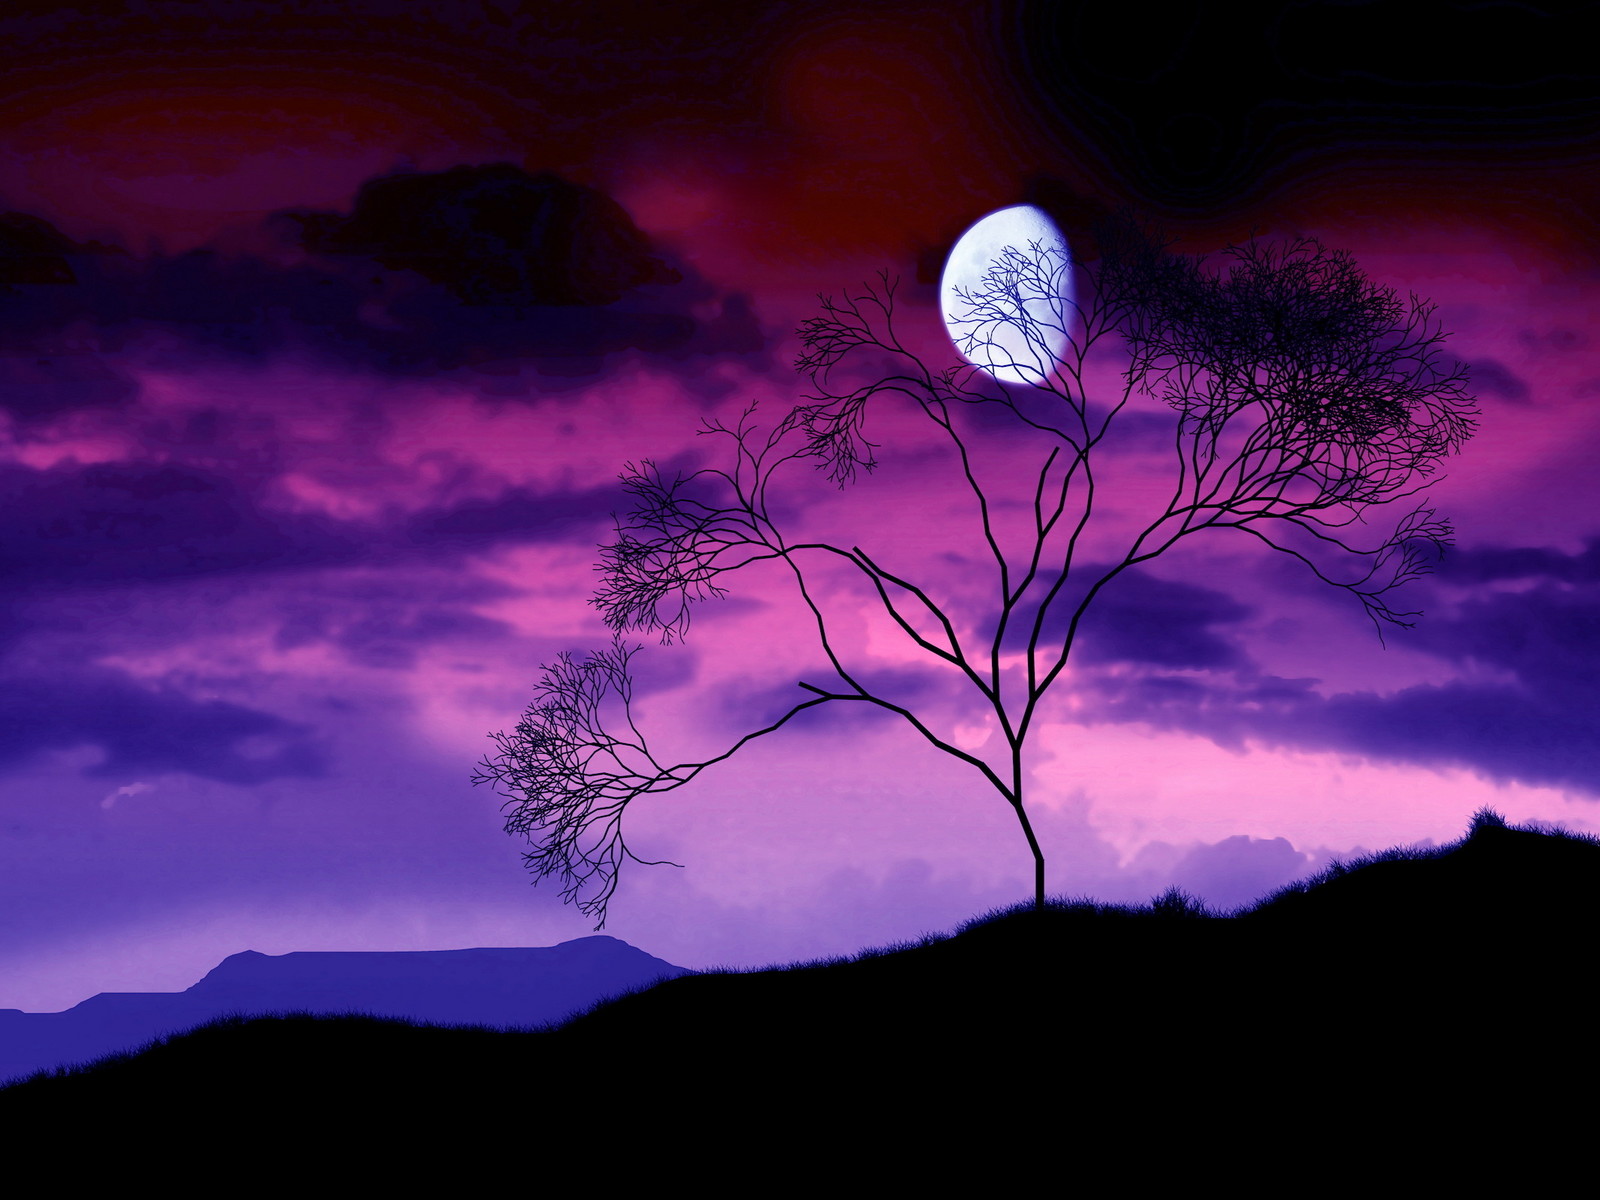 Full Moon on a Starry Night HD wallpaper download